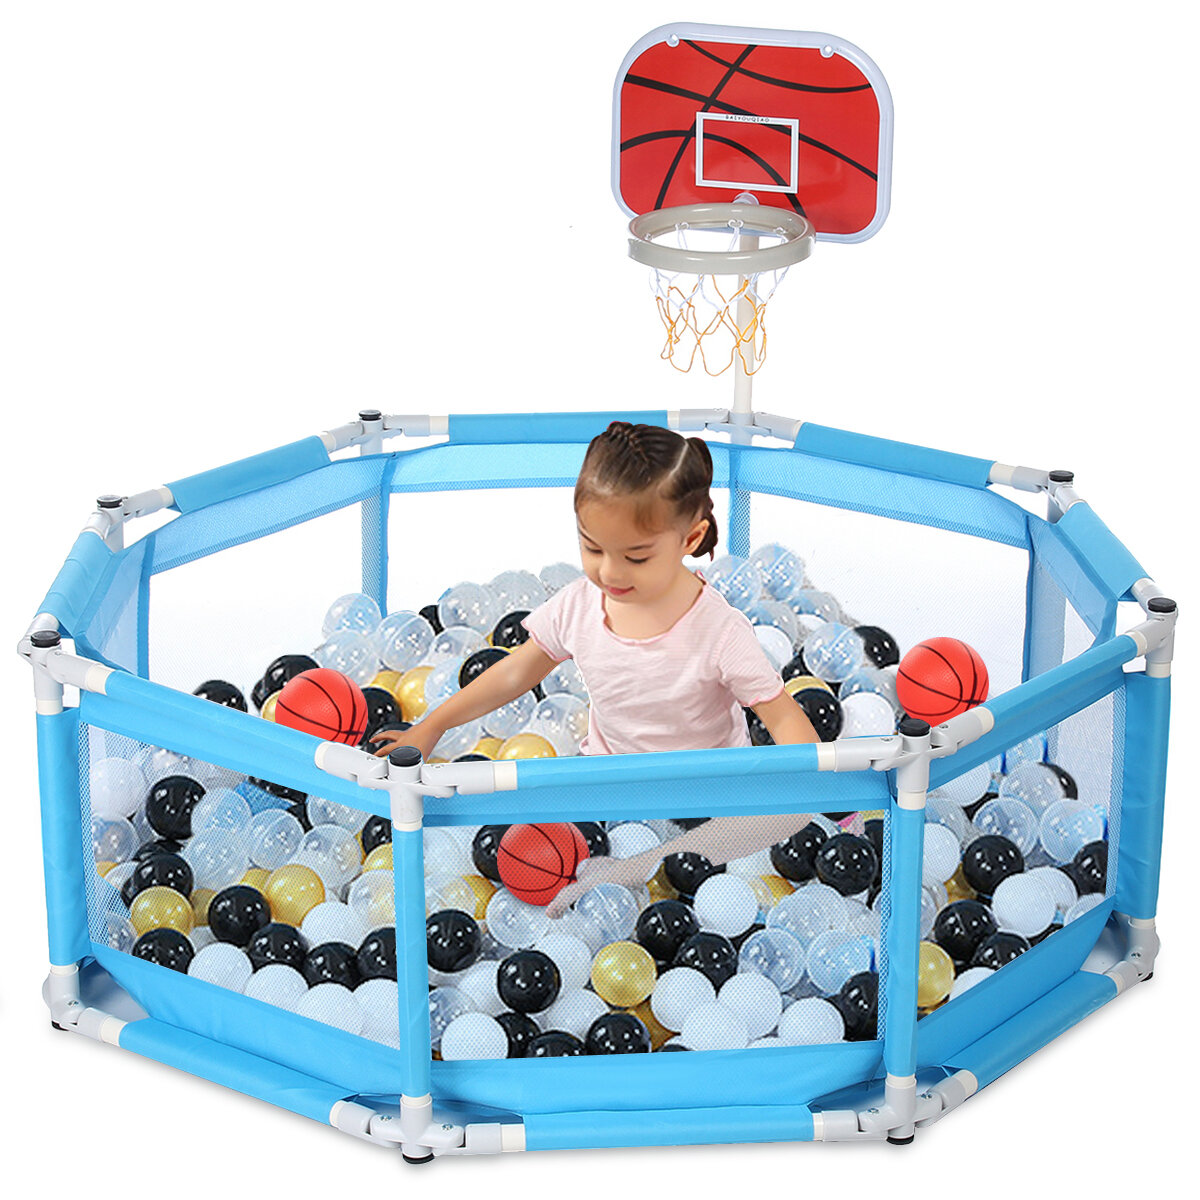 Foldable Portable Baby Playpen Square Children Toddler Kids Safety Fence Indoor Outdoor Play Pen Ocean Portable Ball Pit